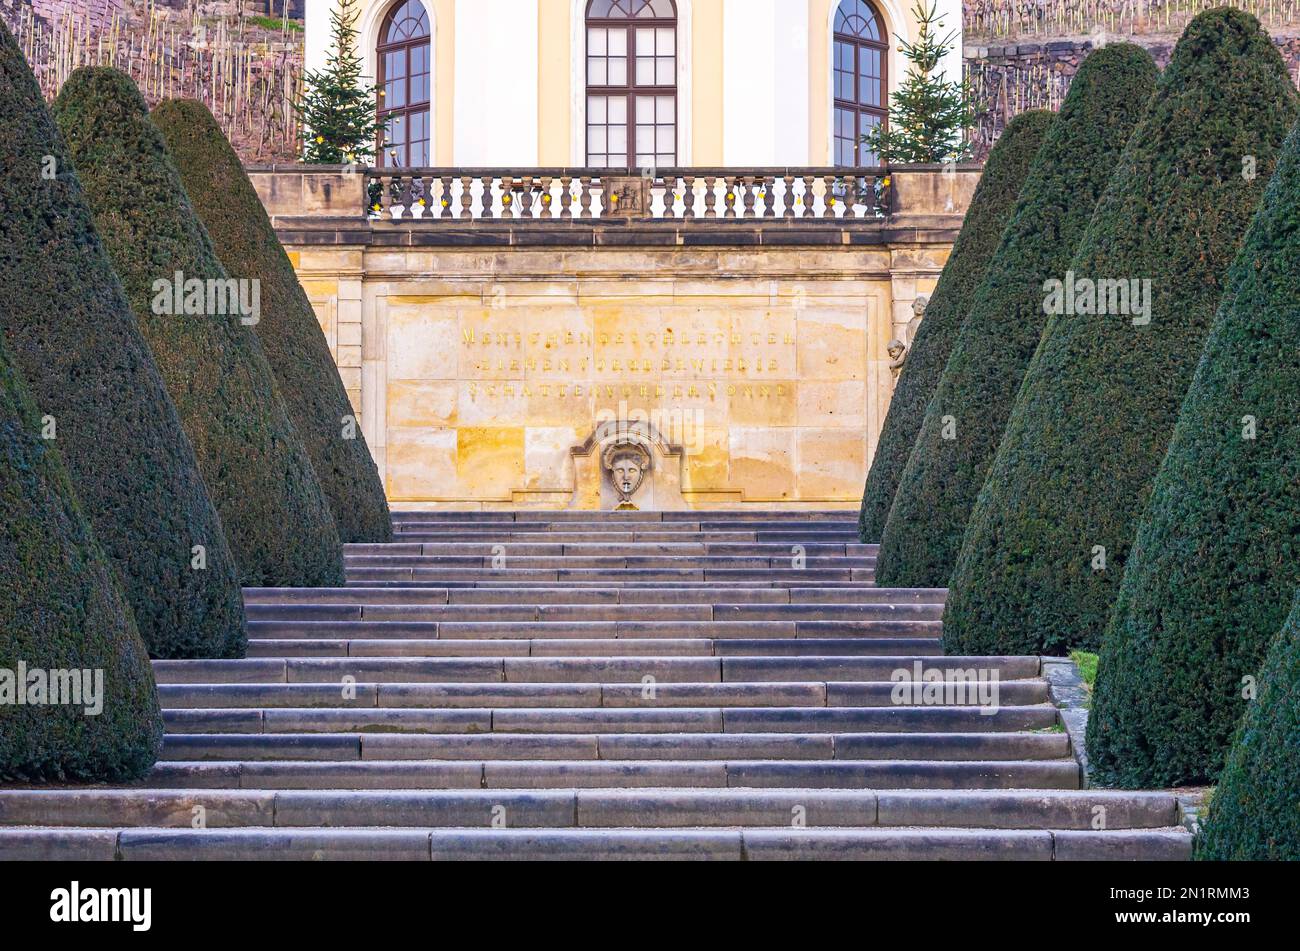 So called Muschelbrunnen with motto, Belvedere in the garden of Wackerbarth Manor, seat of the Saxon State Winery in Radebeul, Saxony, Germany. Stock Photo